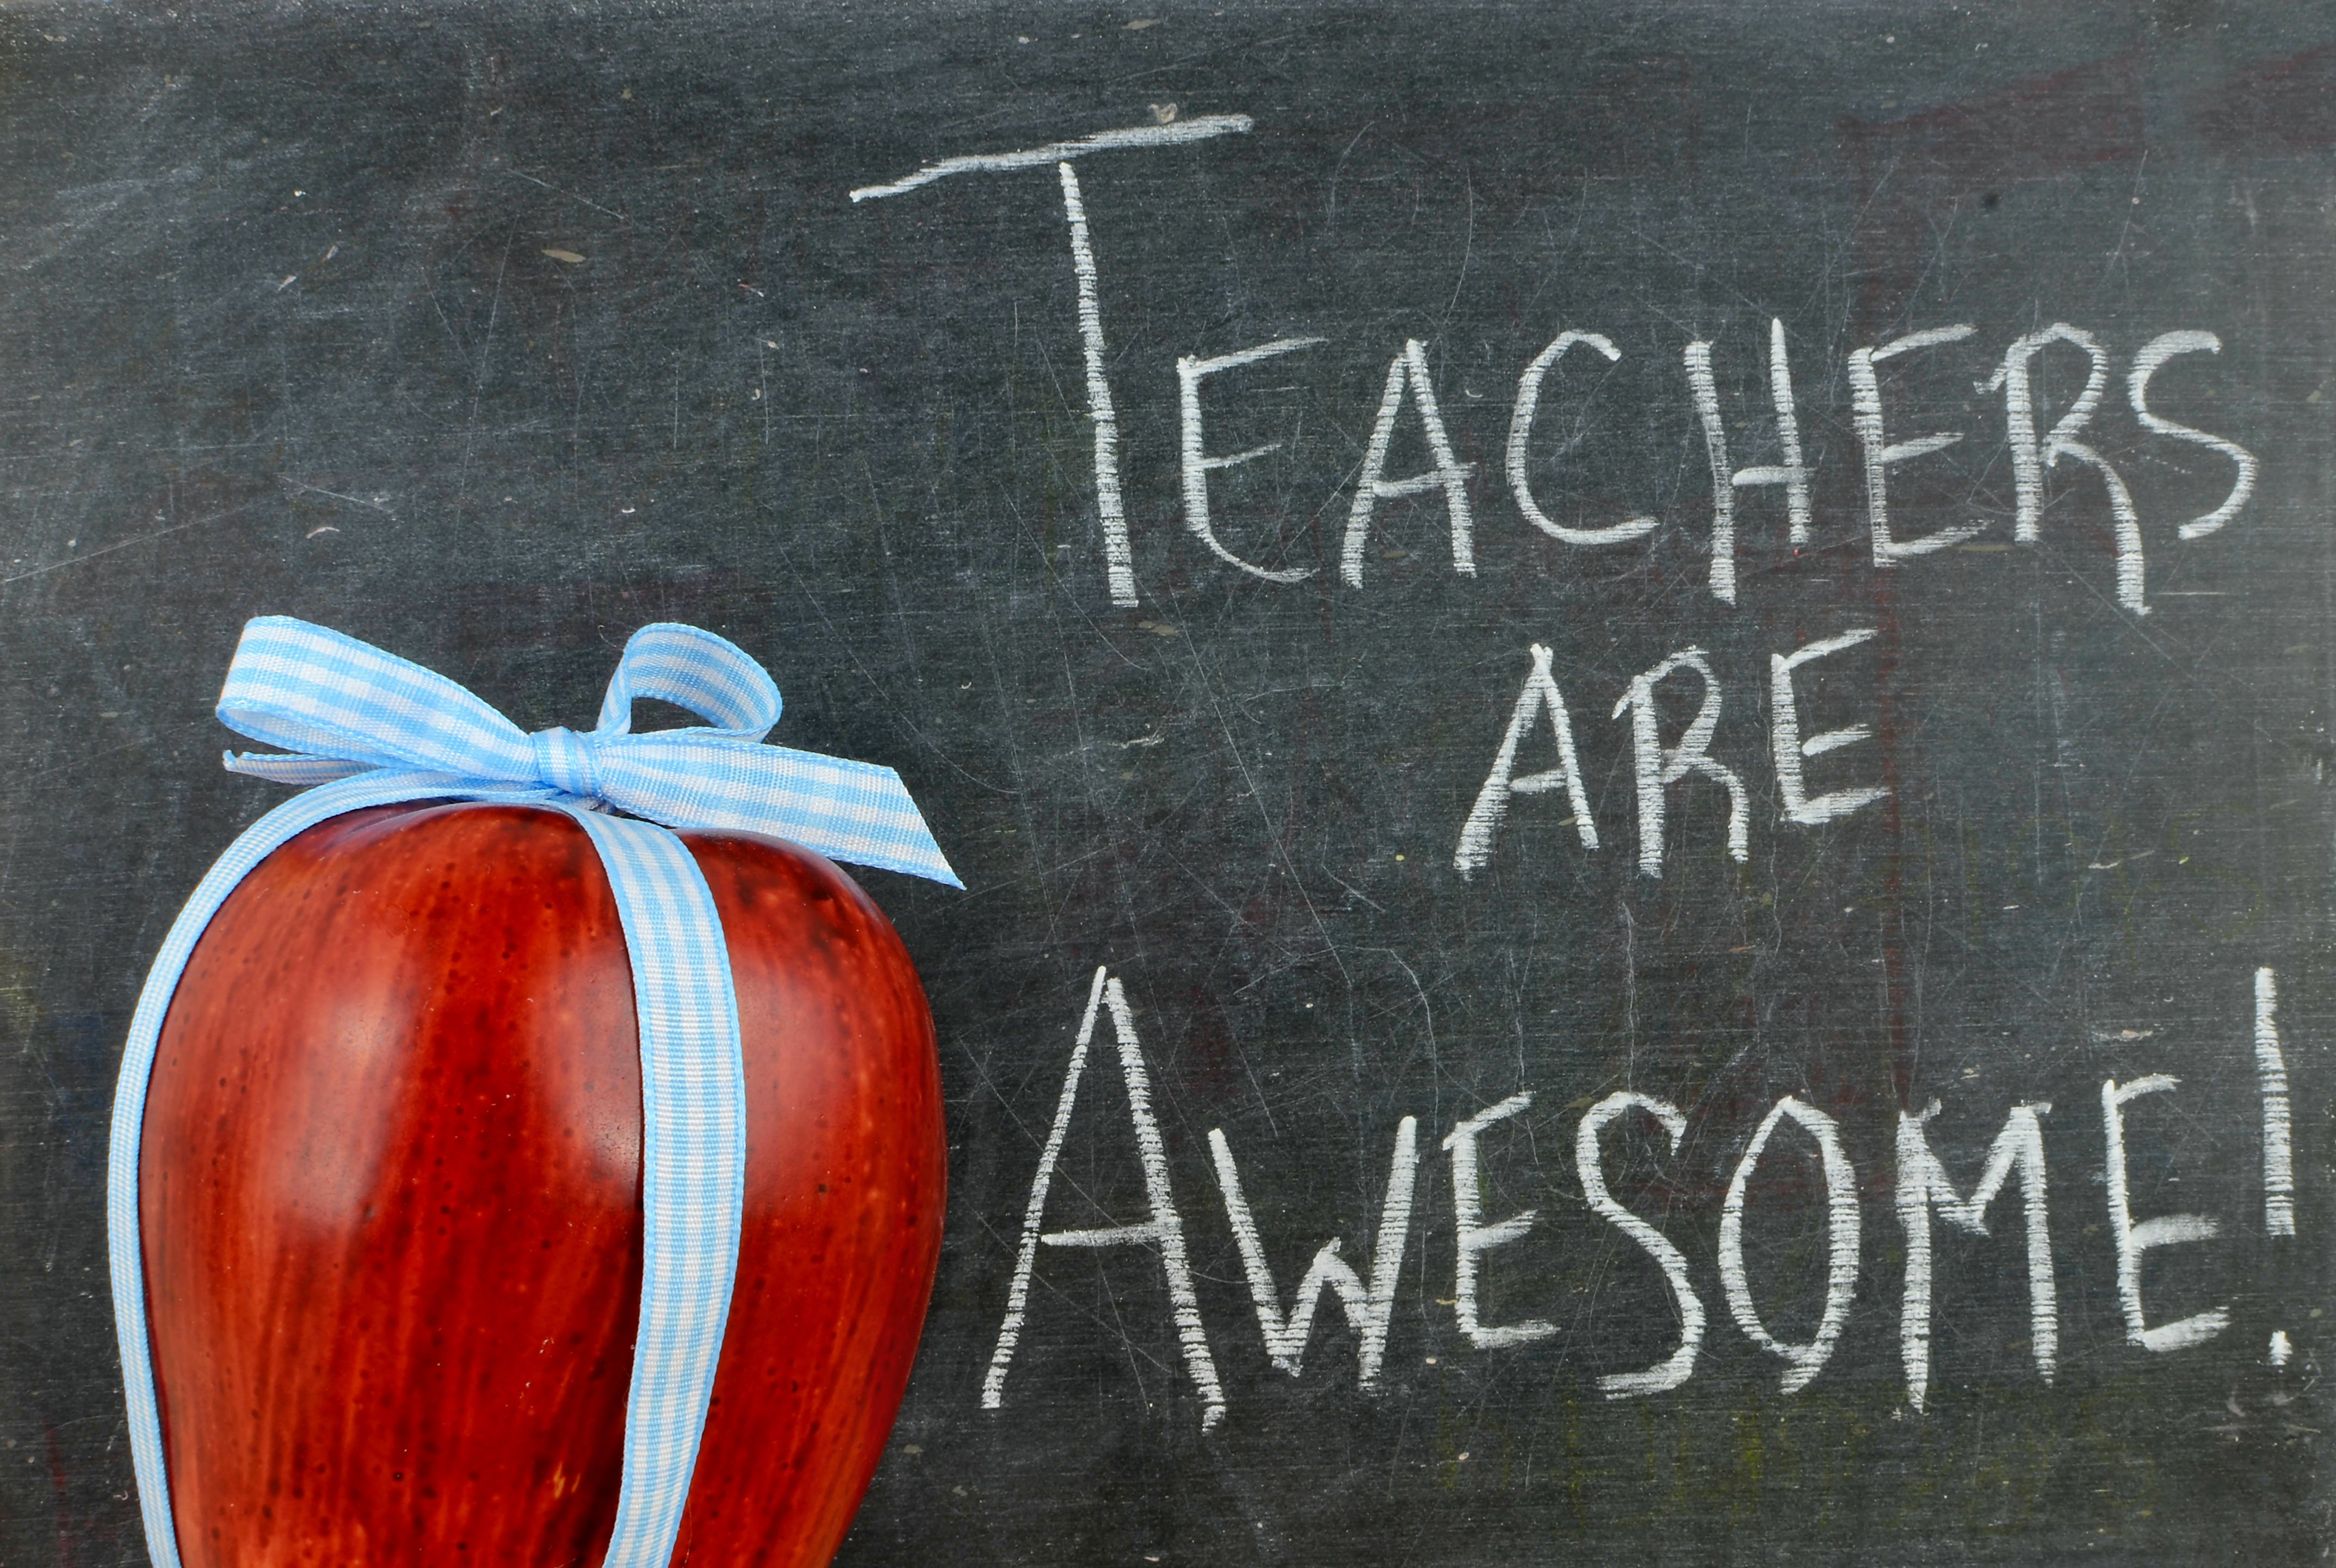 Chalkboard message stating “Teachers are awesome!“ with a red apple wrapped in a blue plaid ribbon.